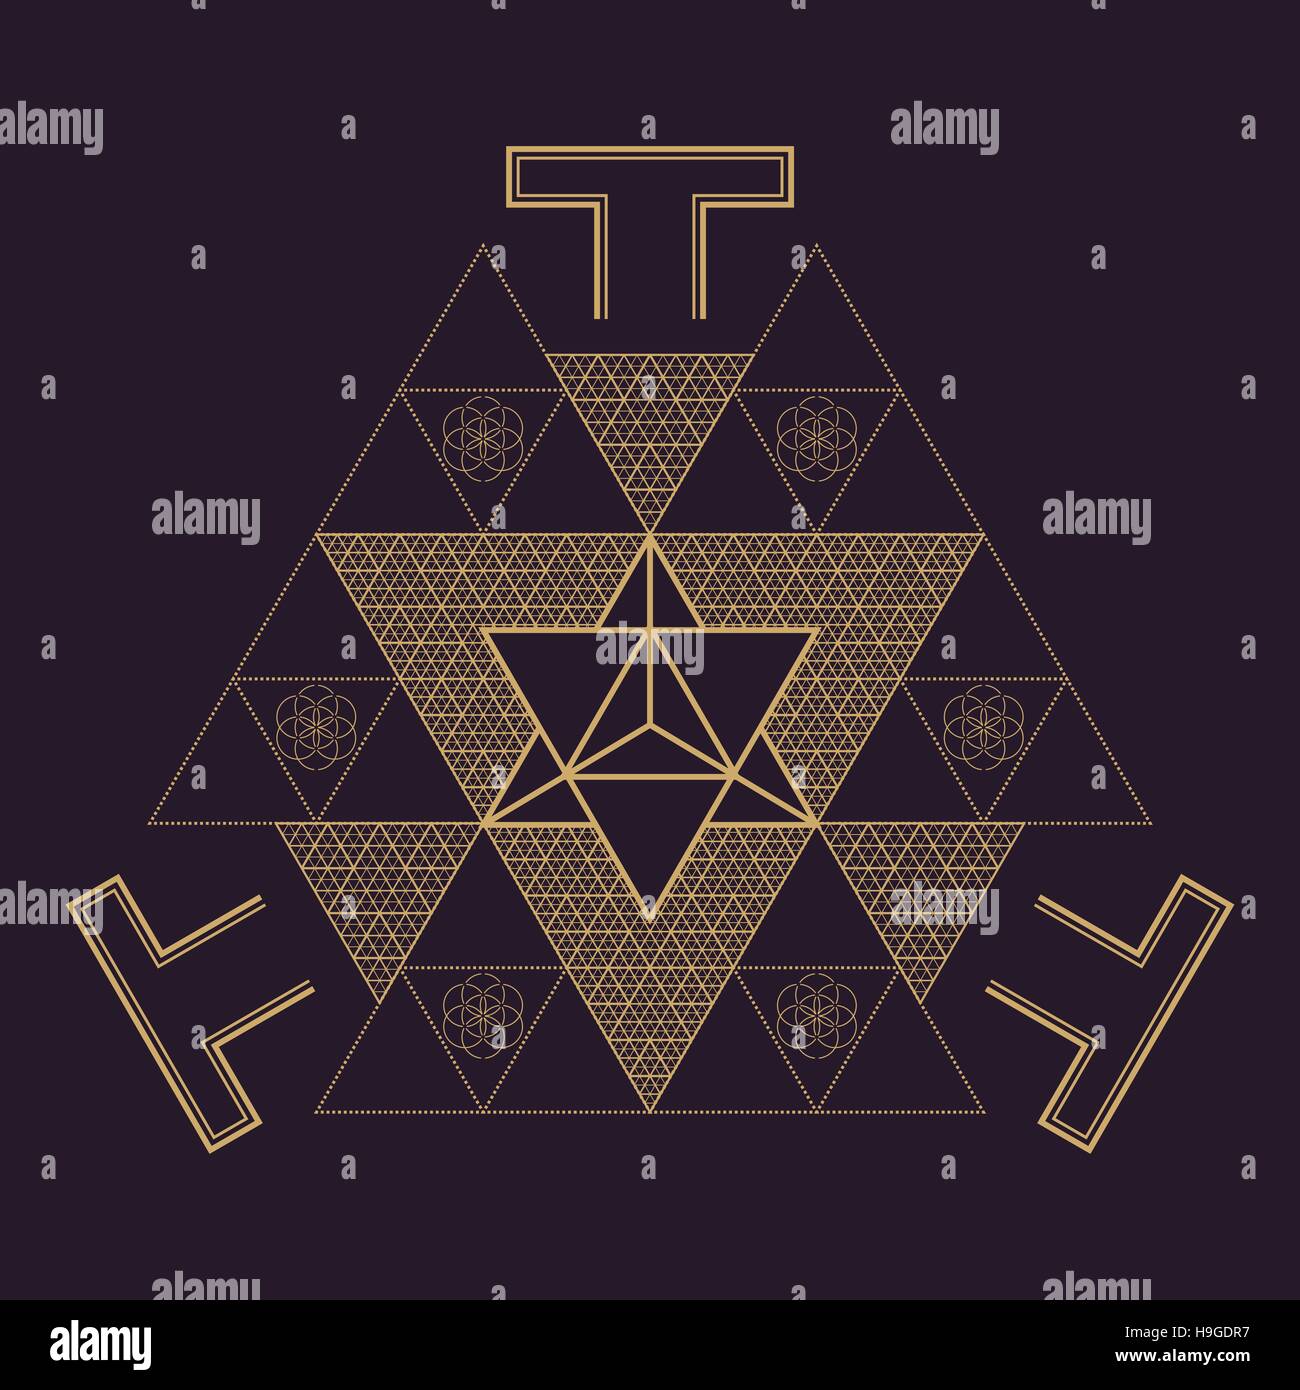 vector gold monochrome design abstract mandala sacred geometry illustration triangles Merkaba Seed of life signs isolated dark brown background Stock Vector